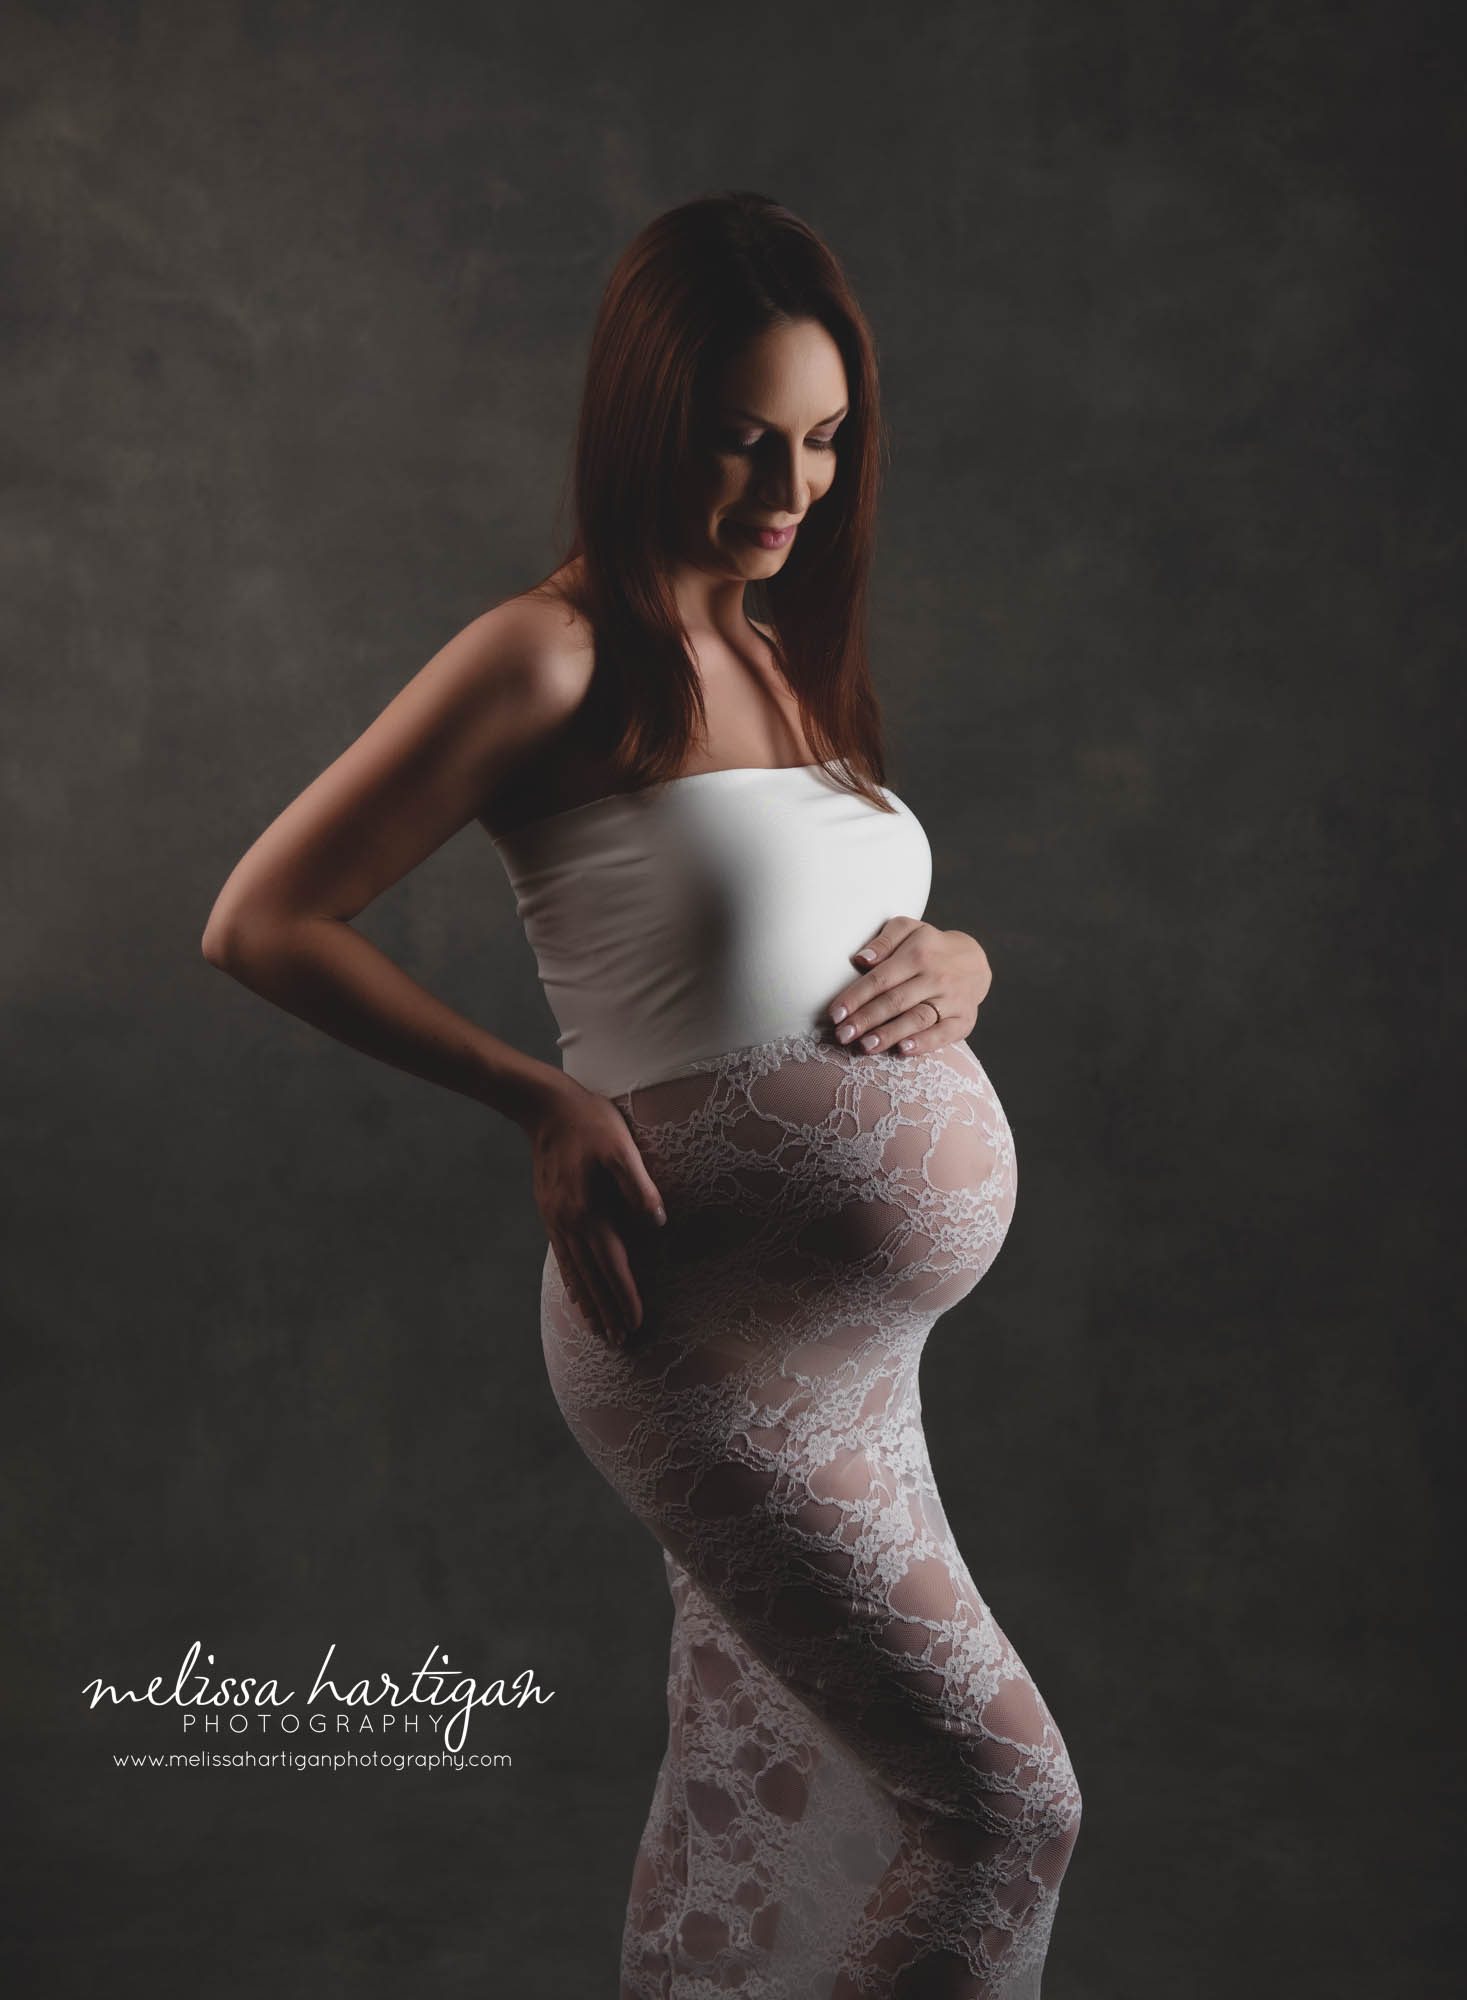 expectant mom wearing cream and lace maternity dress in studio